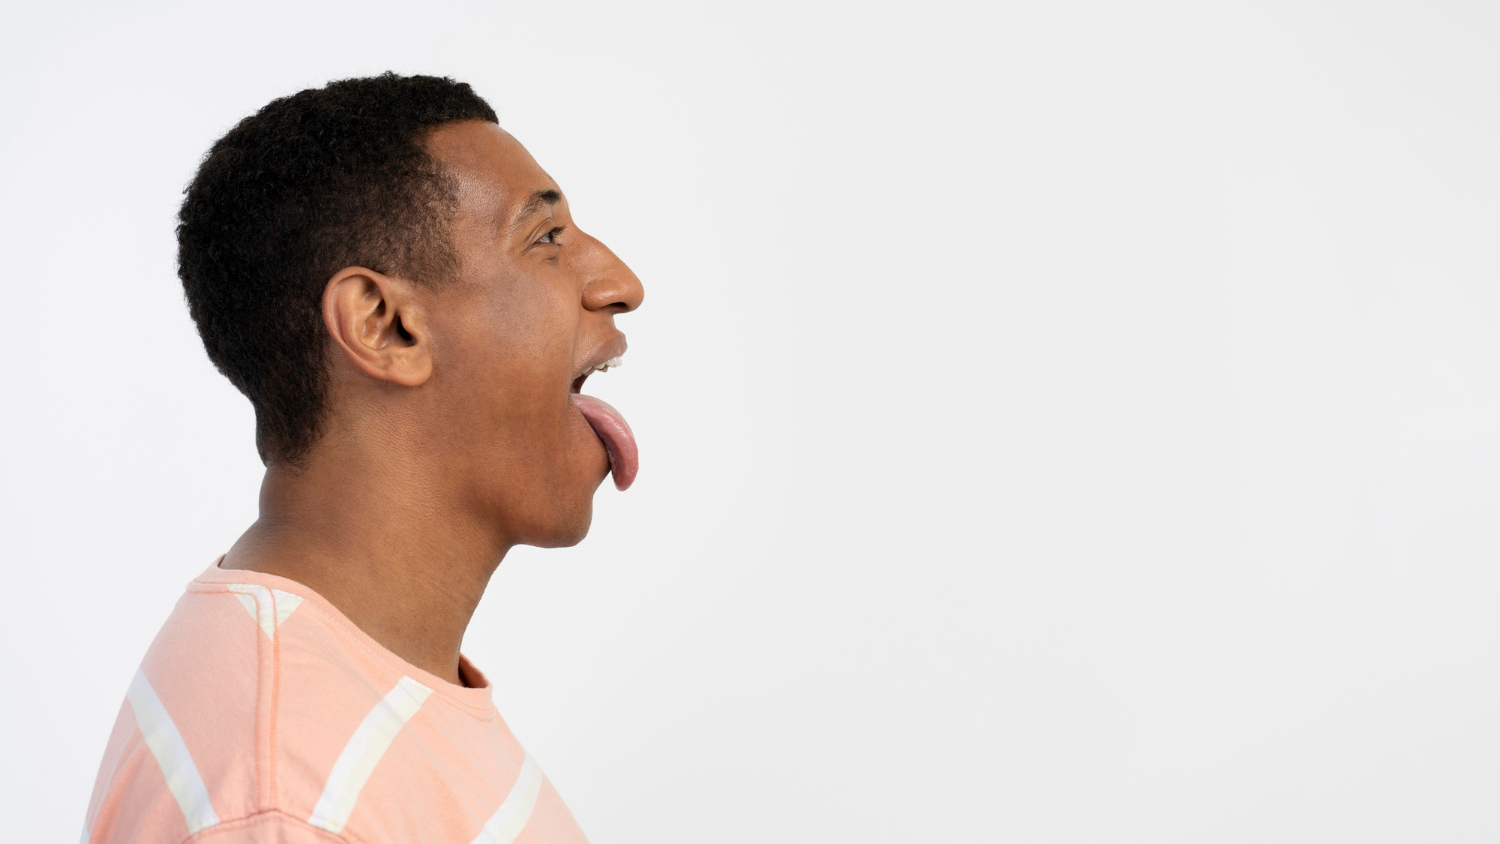 Diagnosis & Management Of Tongue Tie In Adults